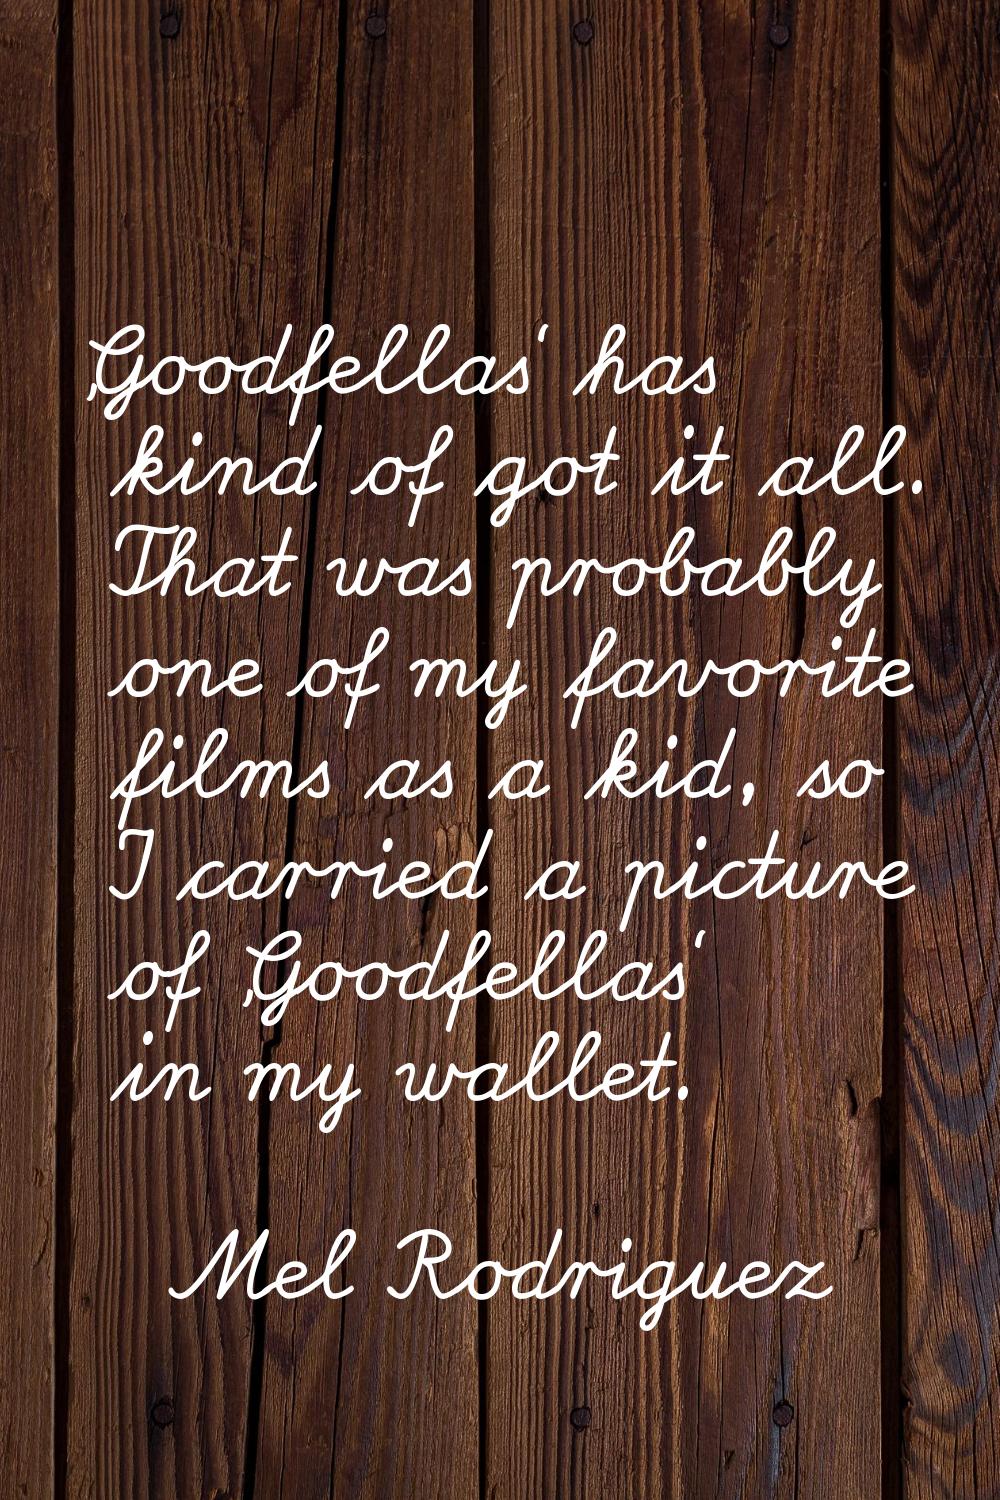 'Goodfellas' has kind of got it all. That was probably one of my favorite films as a kid, so I carr